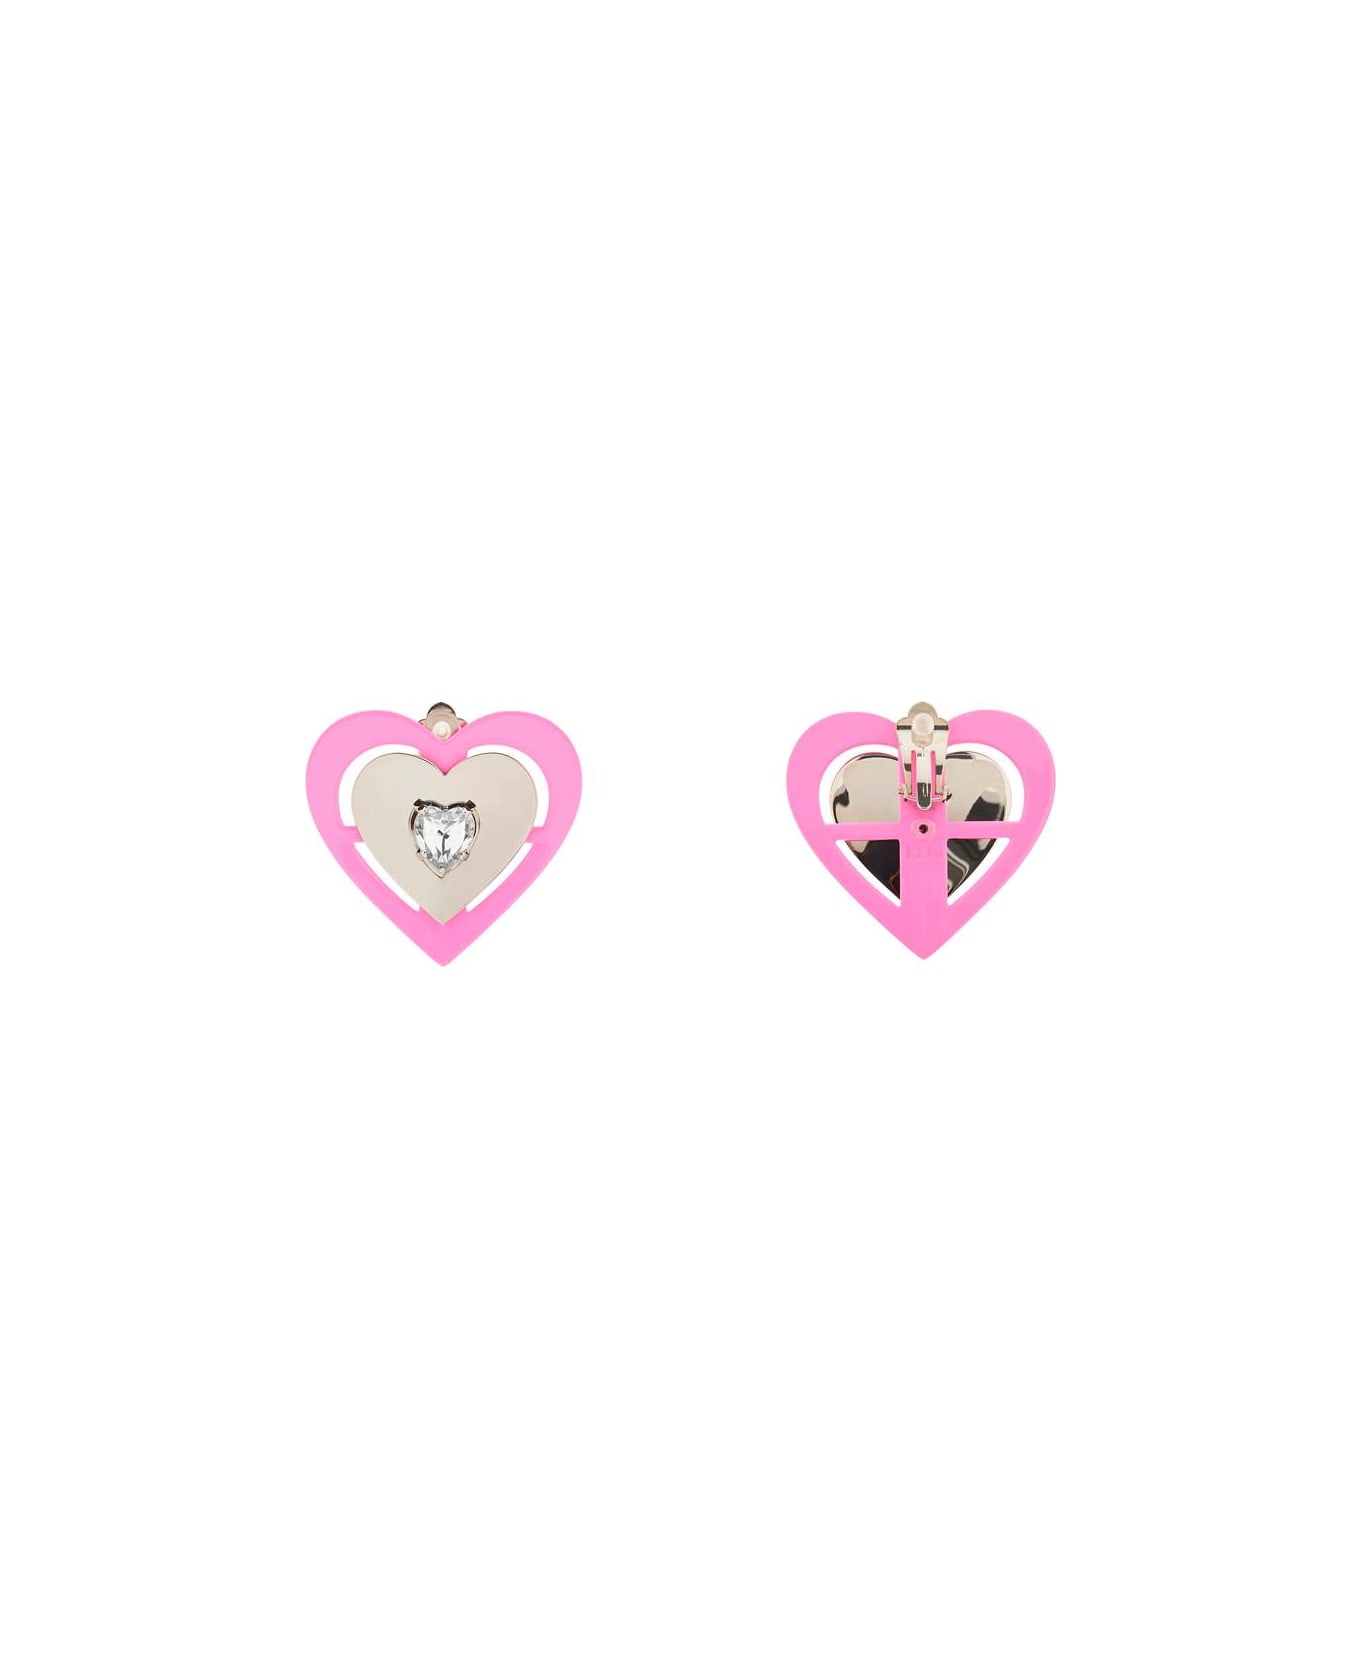 SafSafu 'pink Neon Heart' Clip-on Earrings - SILVER/PINK イヤリング